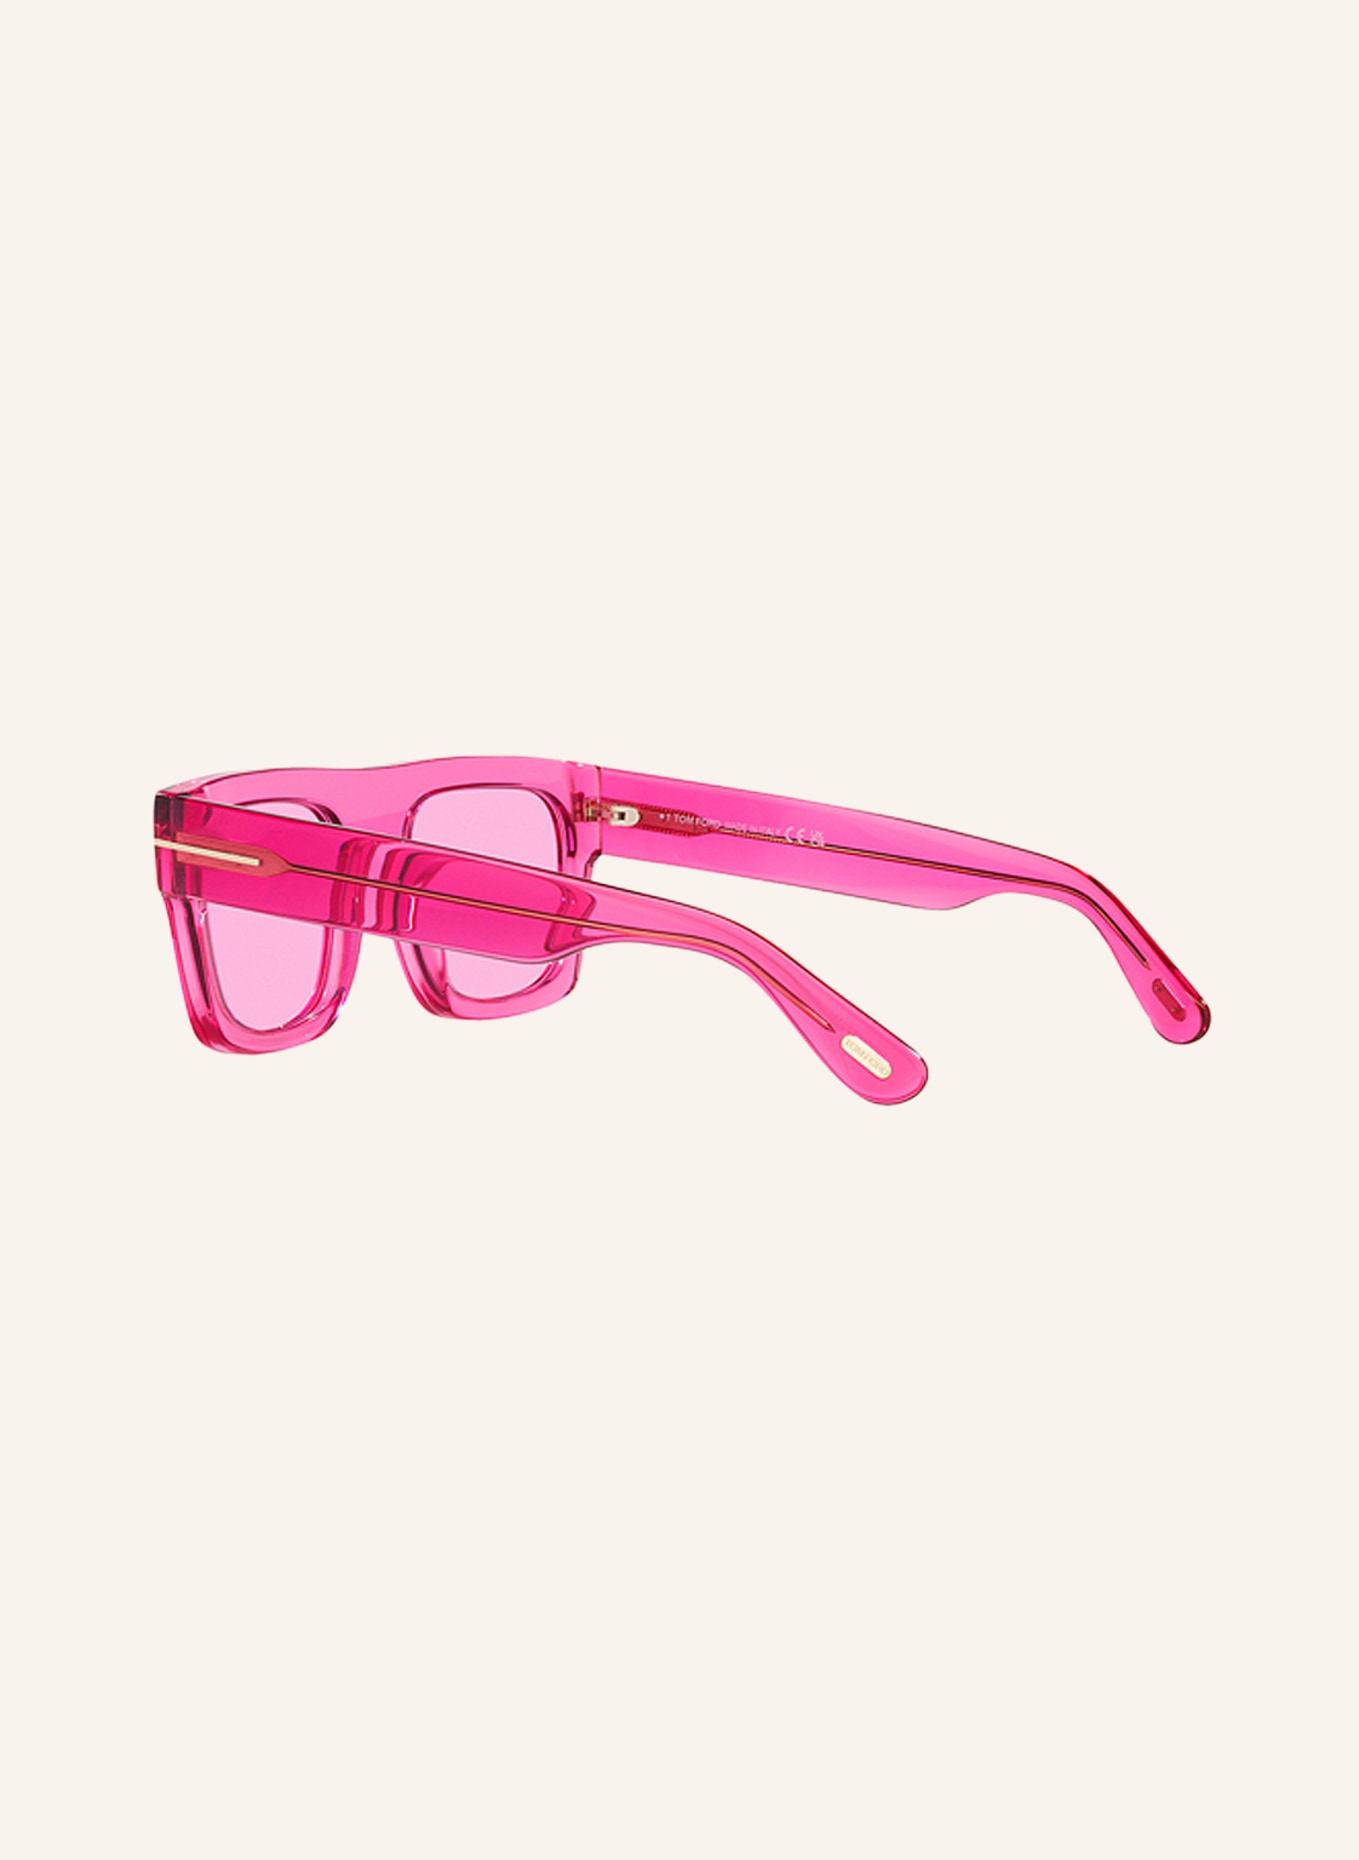 TOM FORD Sonnenbrille FT0711 FAUSTO, Farbe: 3500R1 - PINK/ PINK (Bild 4)